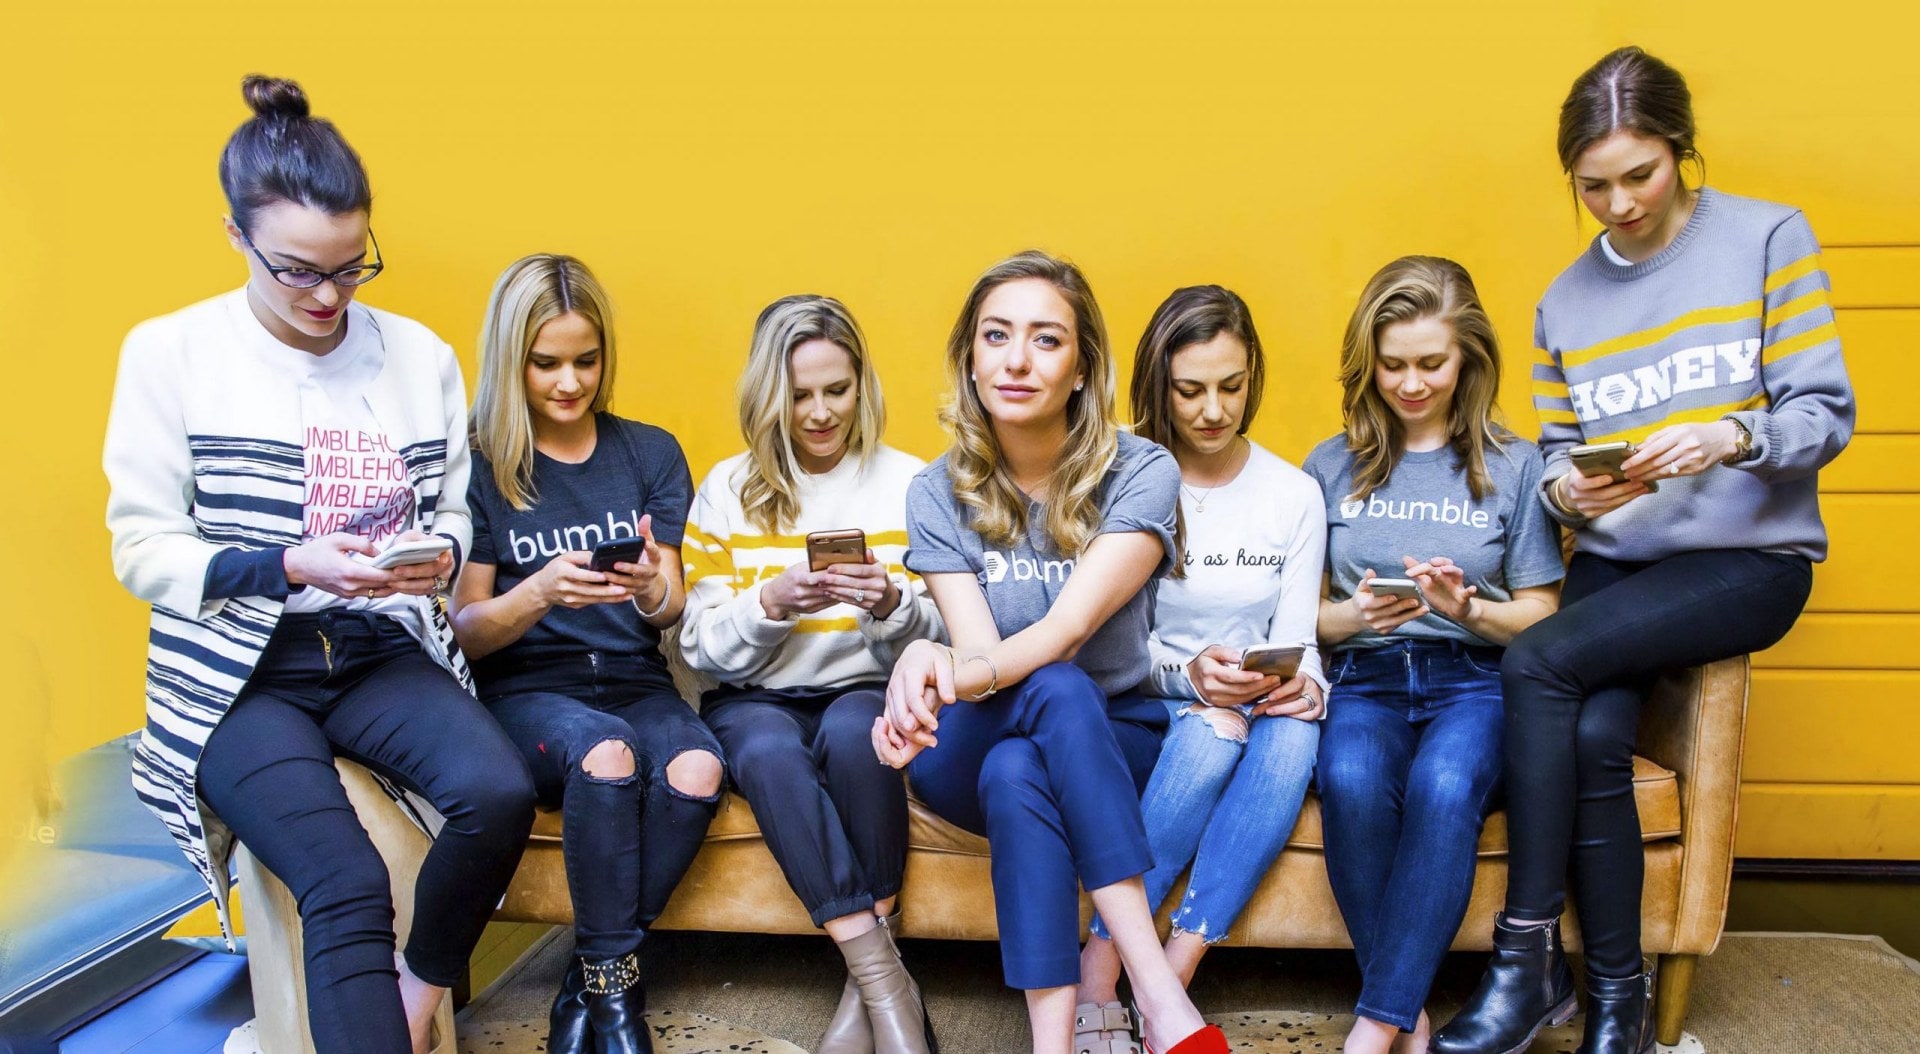 Whitley Wolfe Herd sitting on an orange couch with six women looking down at their mobile phones